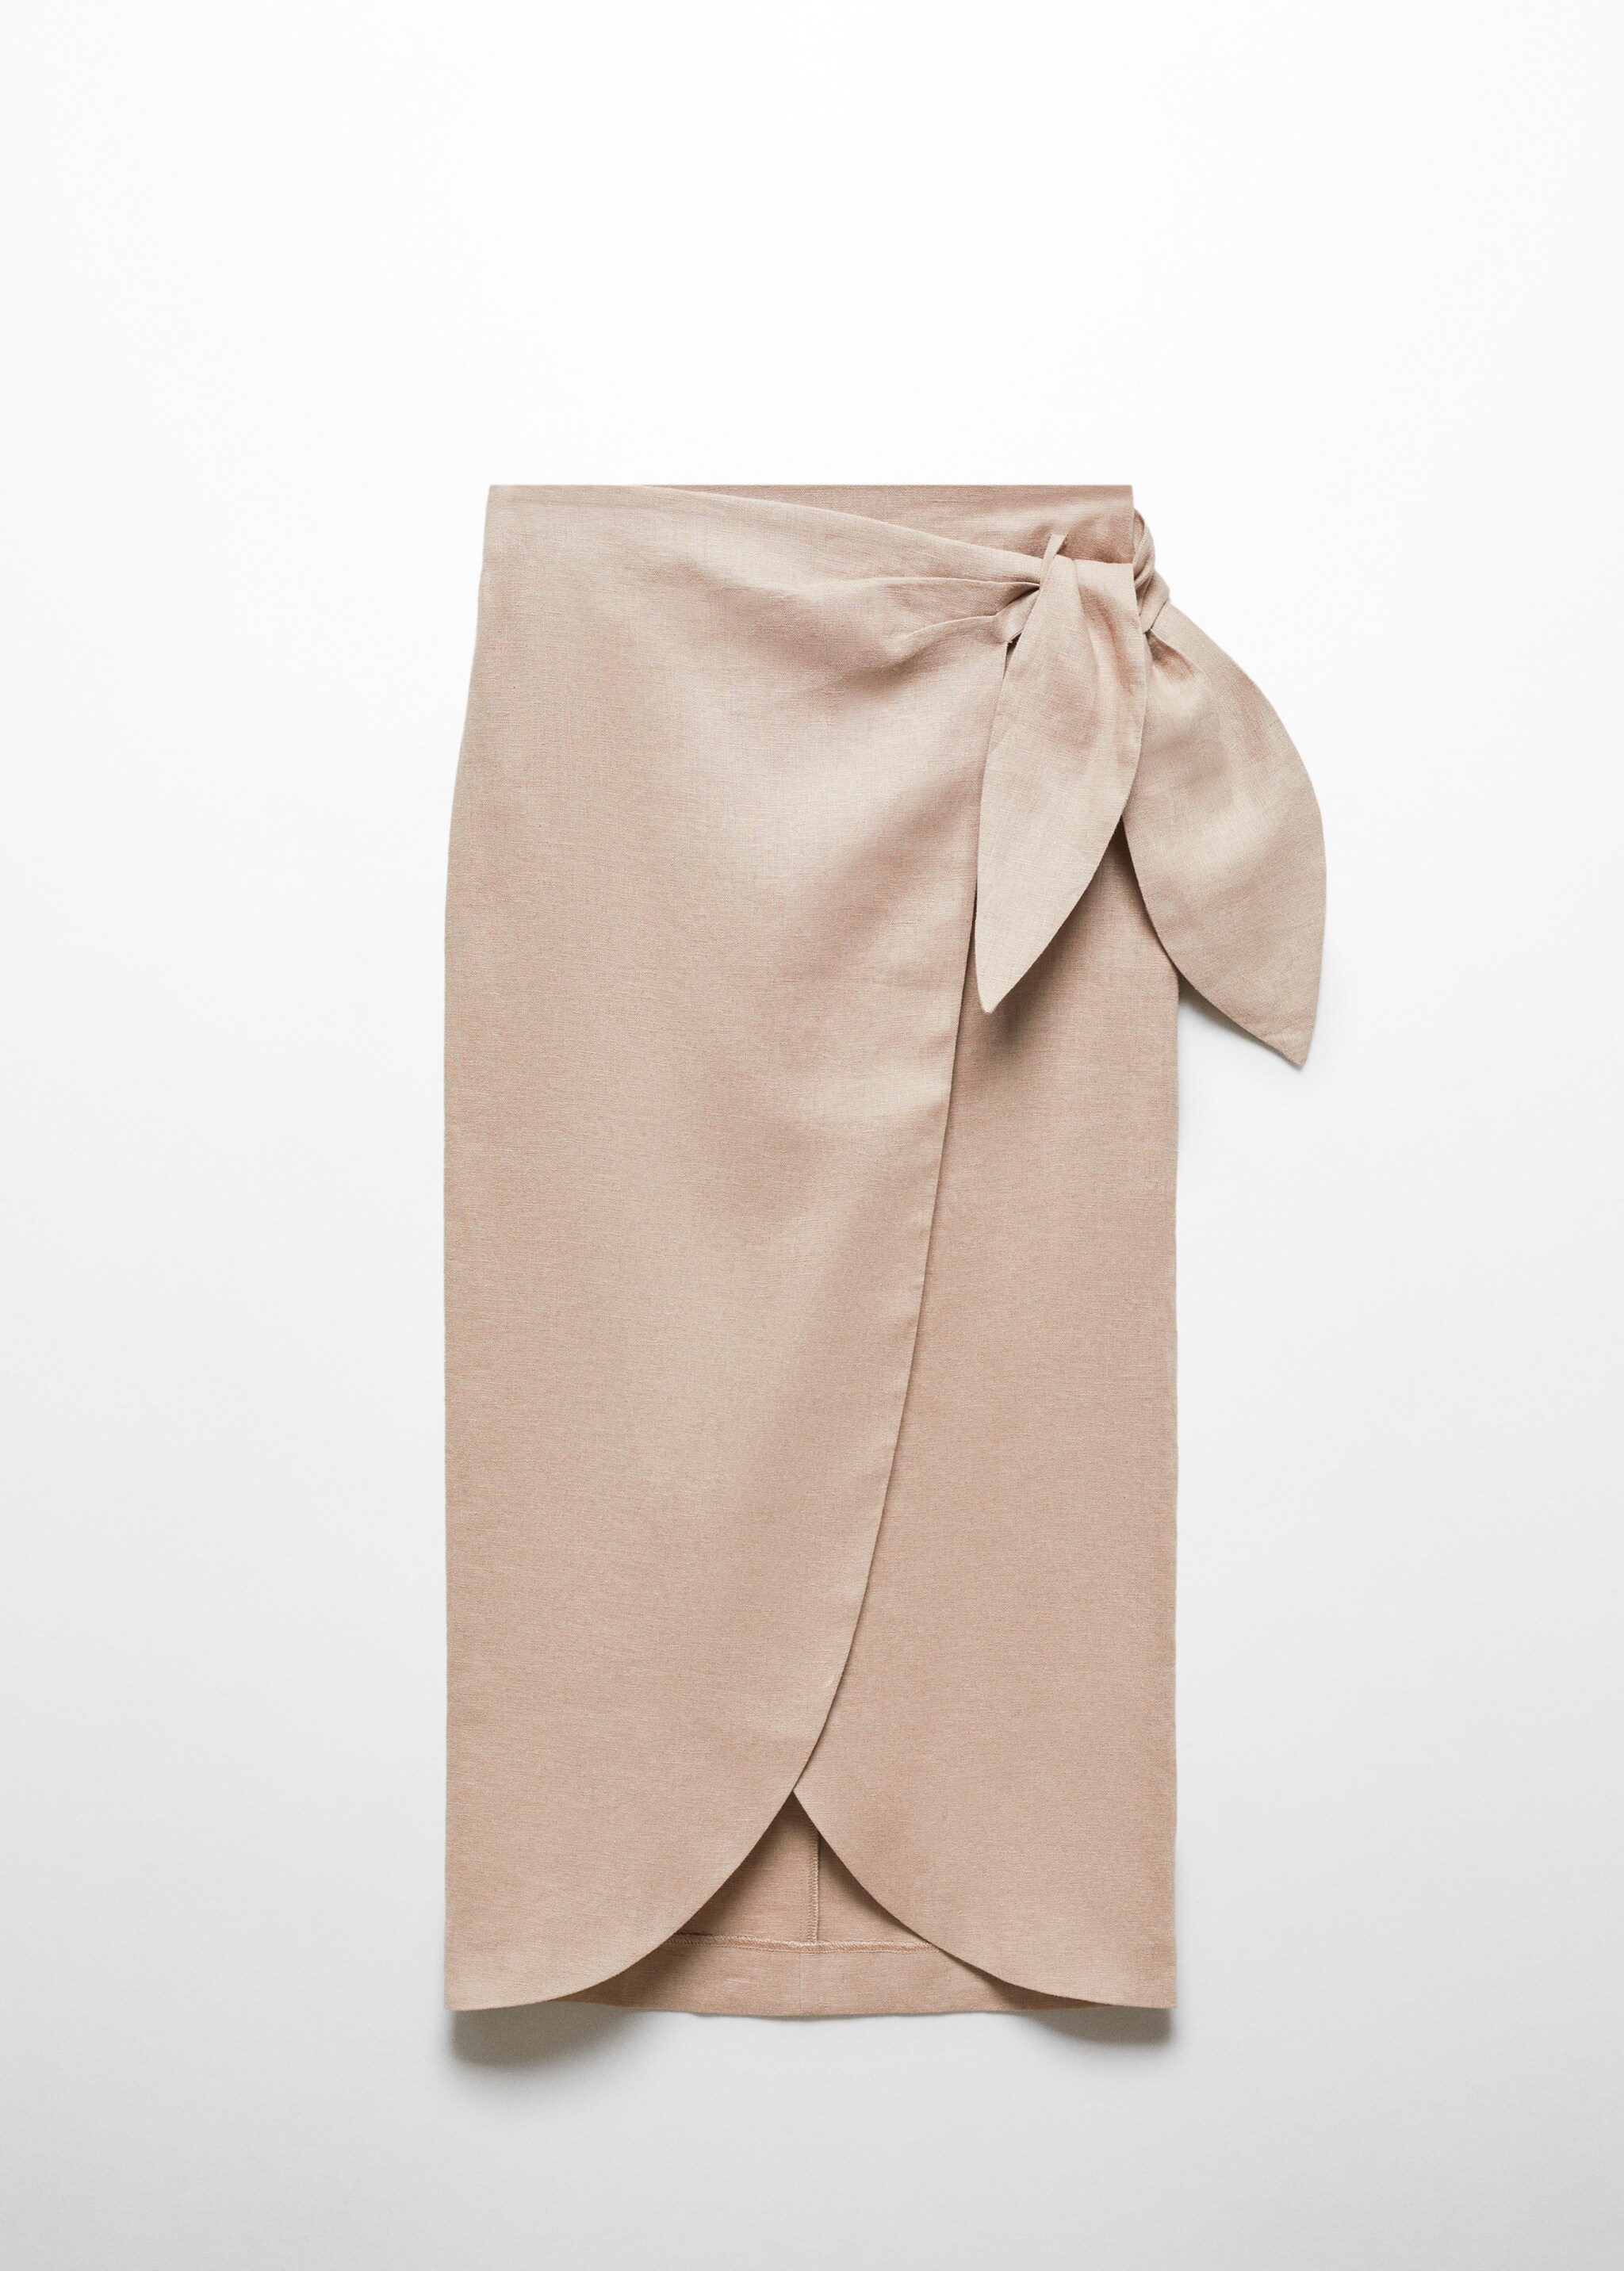 Linen sarong skirt - Article without model